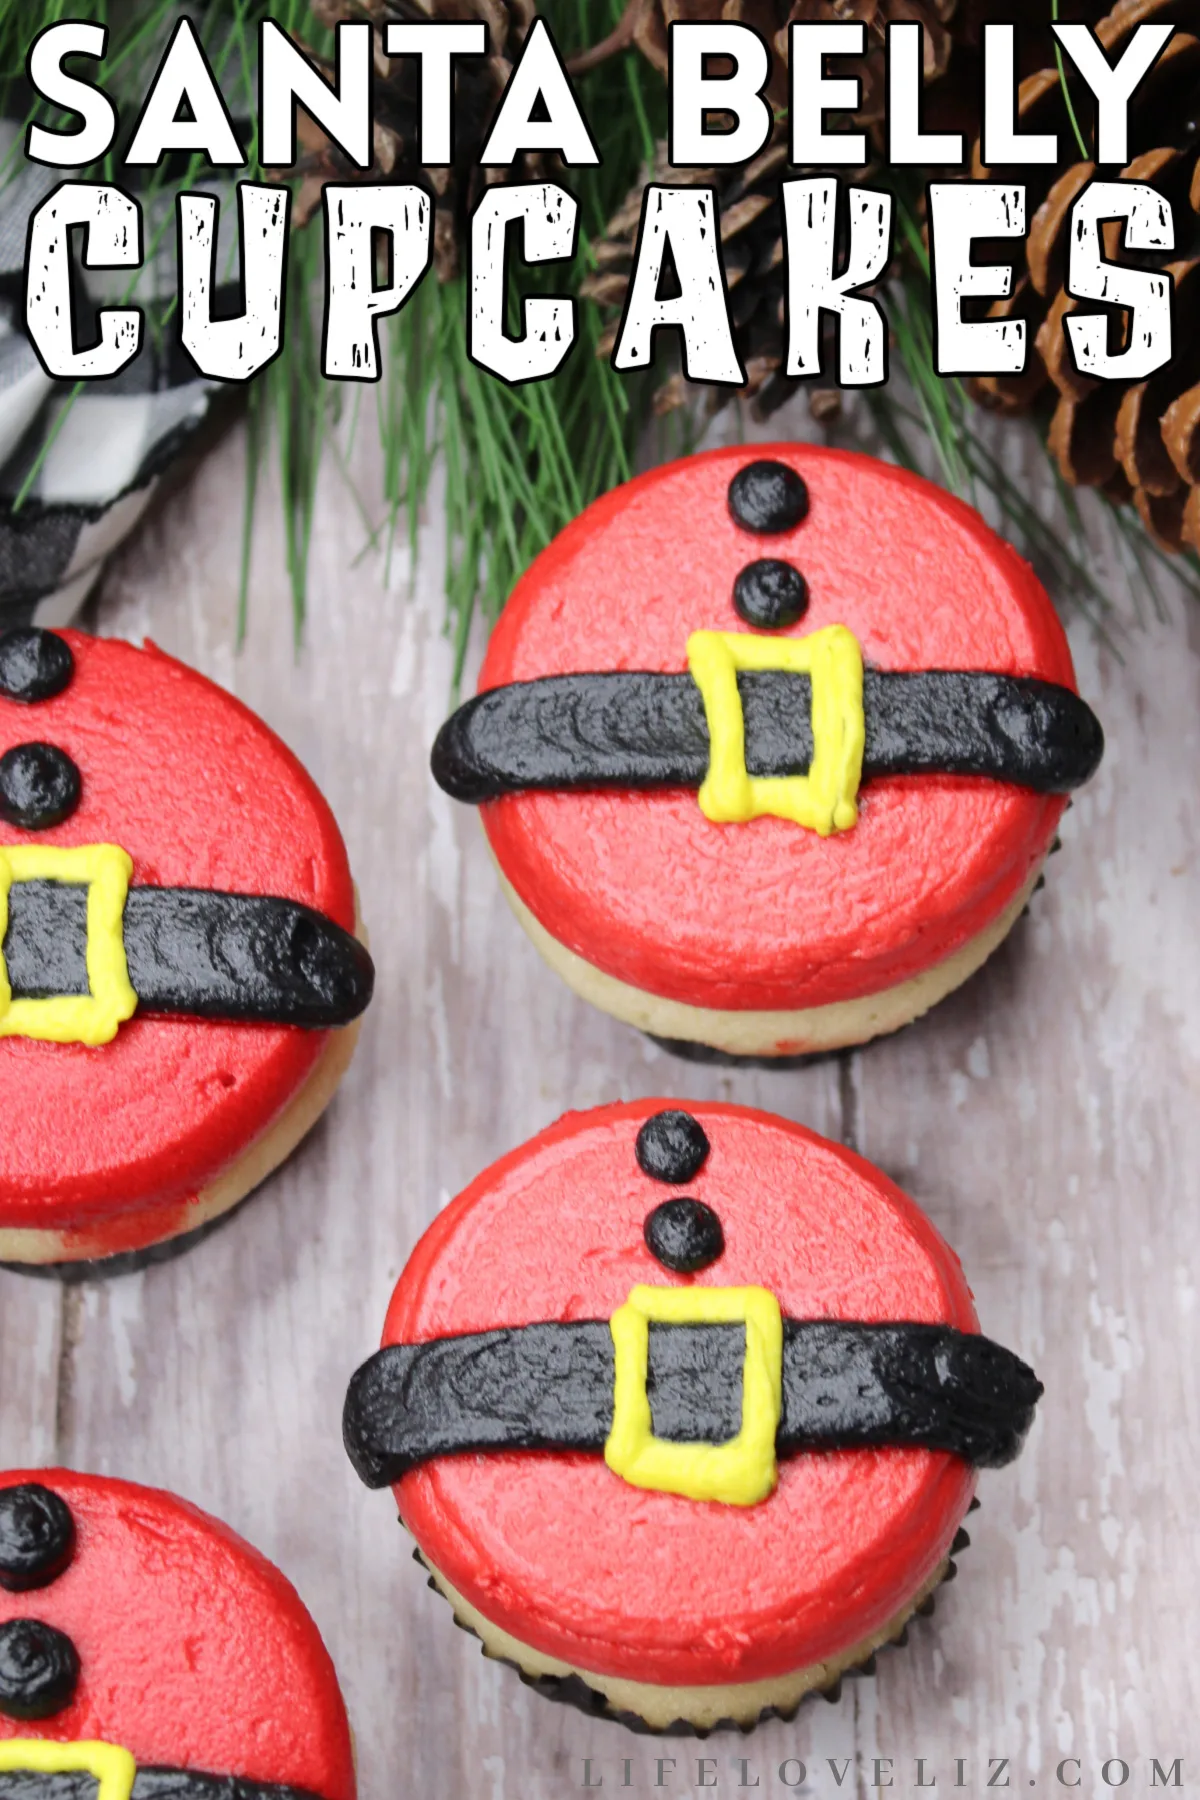 These delicious Santa belly cupcakes are perfect for your next Christmas party! They're easy to make and everyone will love them.